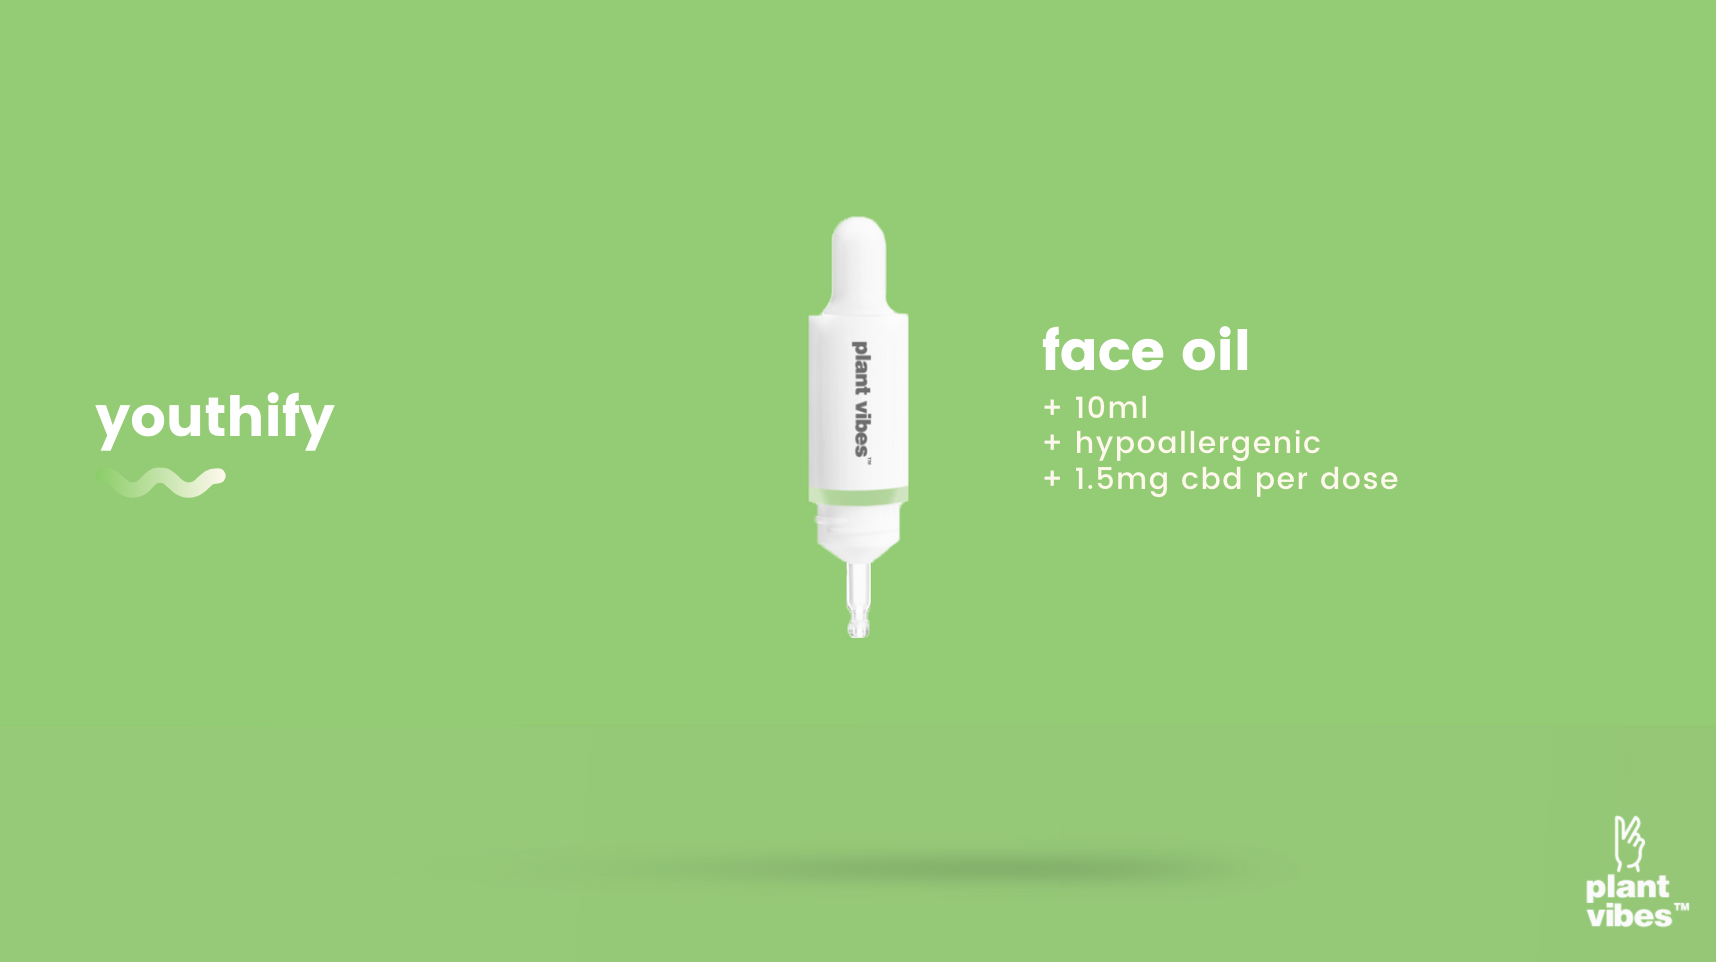 youthify ™ face oil